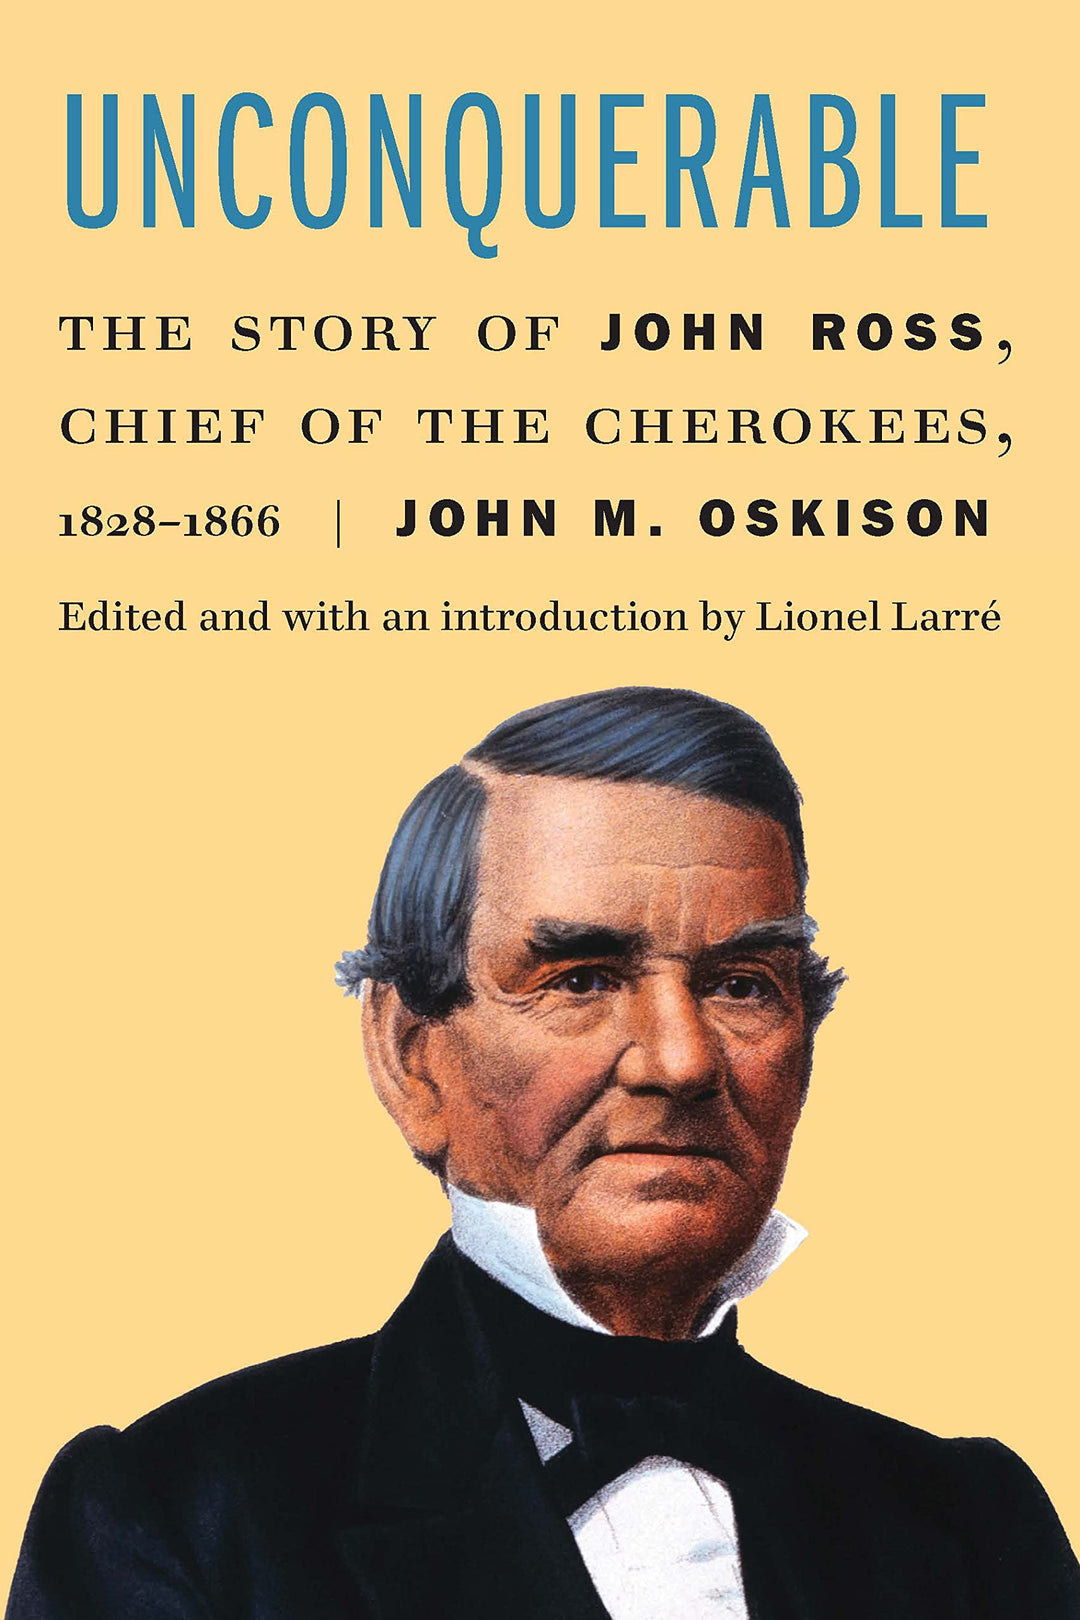 Unconquerable: The Story of John Ross, Chief of the Cherokees, 1828-1866 by John M. Oskison